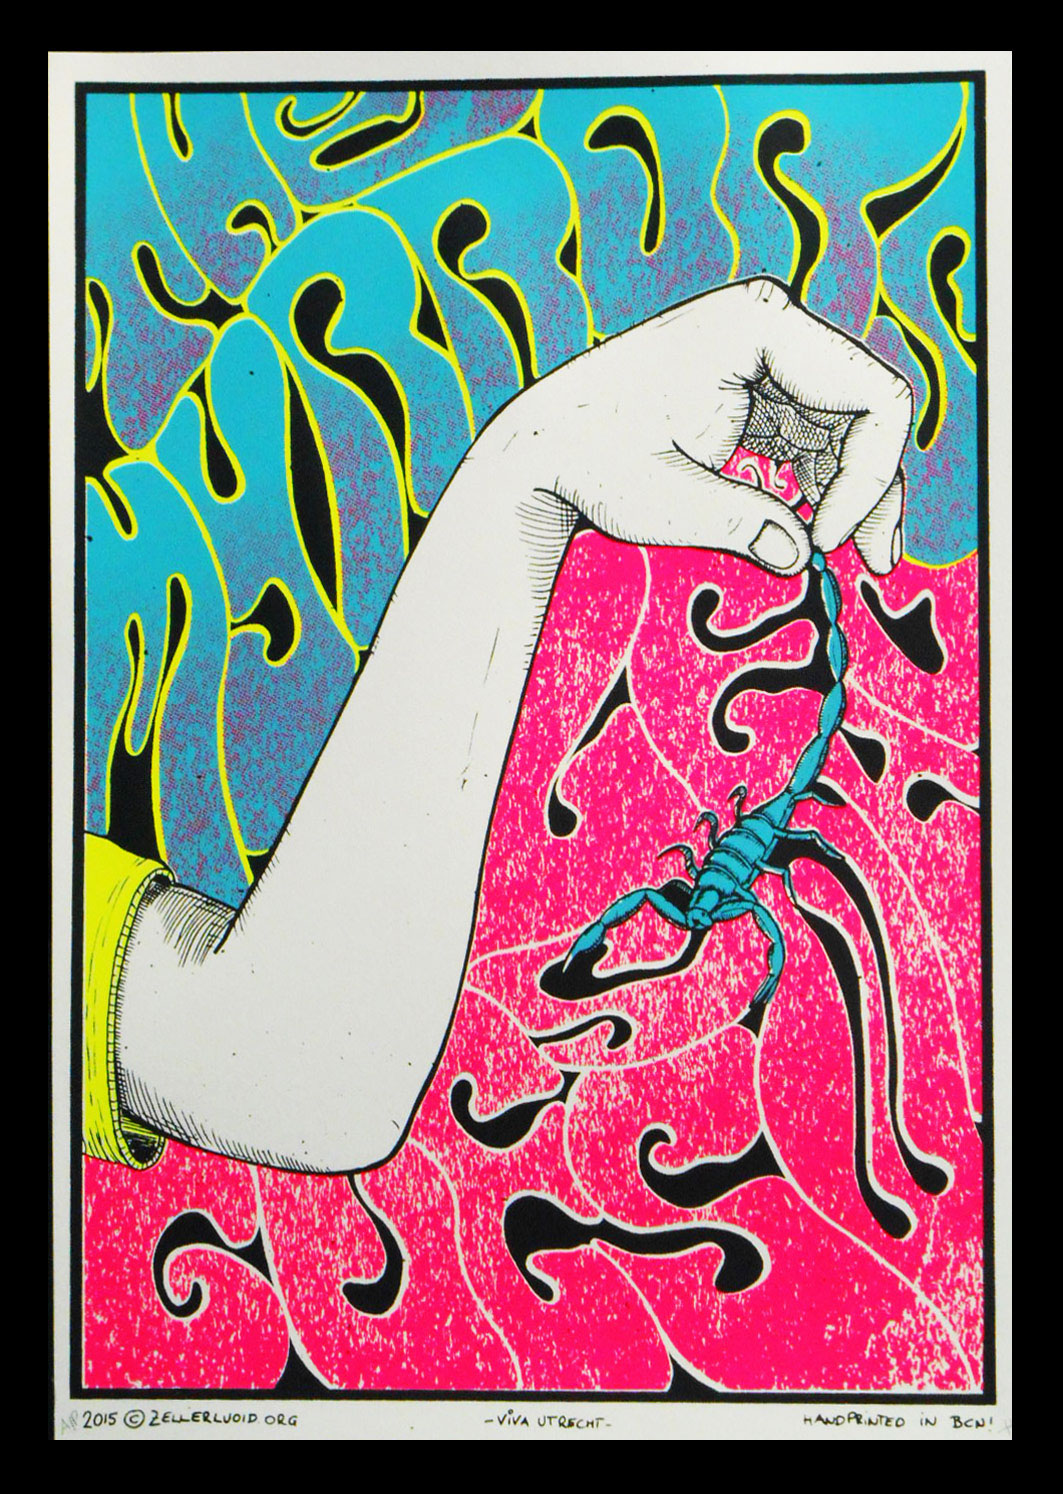 The Myrrors poster GigPoster zellerluoid handmade barcelona the bicycle press limited edition le guess who? screenprint serigrafia official utrecht festival arizona